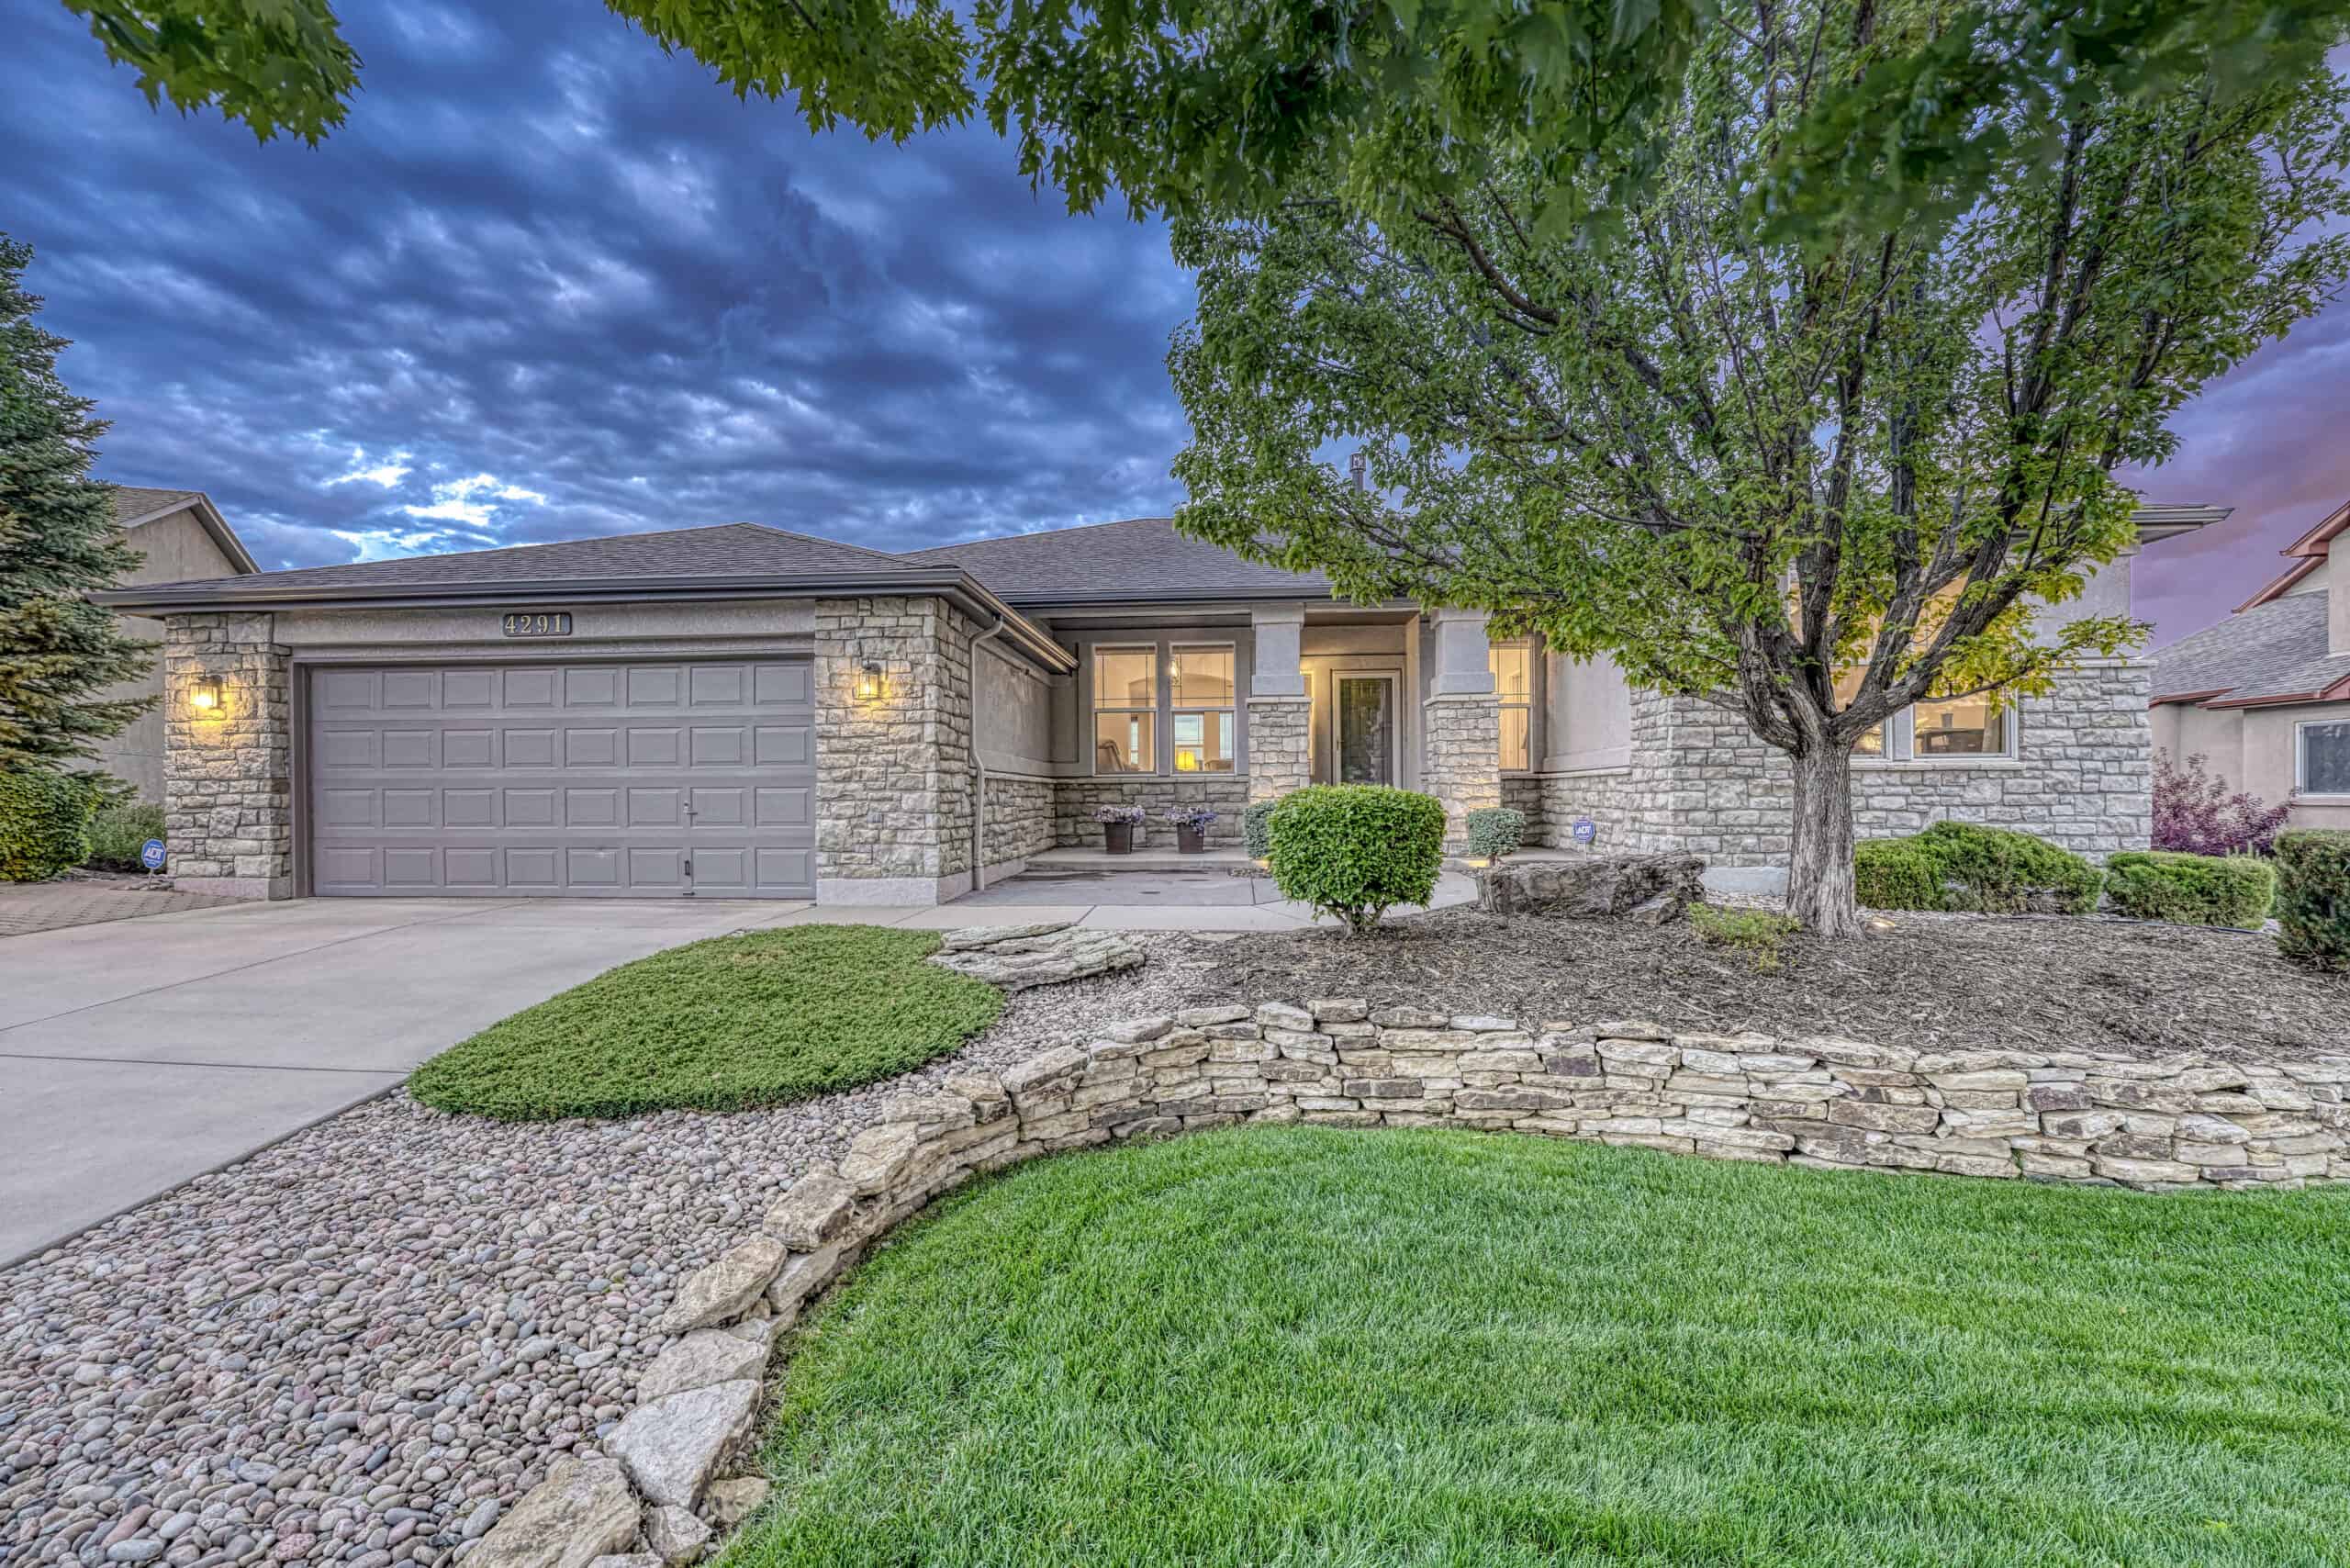 Stucco/Stone Rancher in Springs Ranch